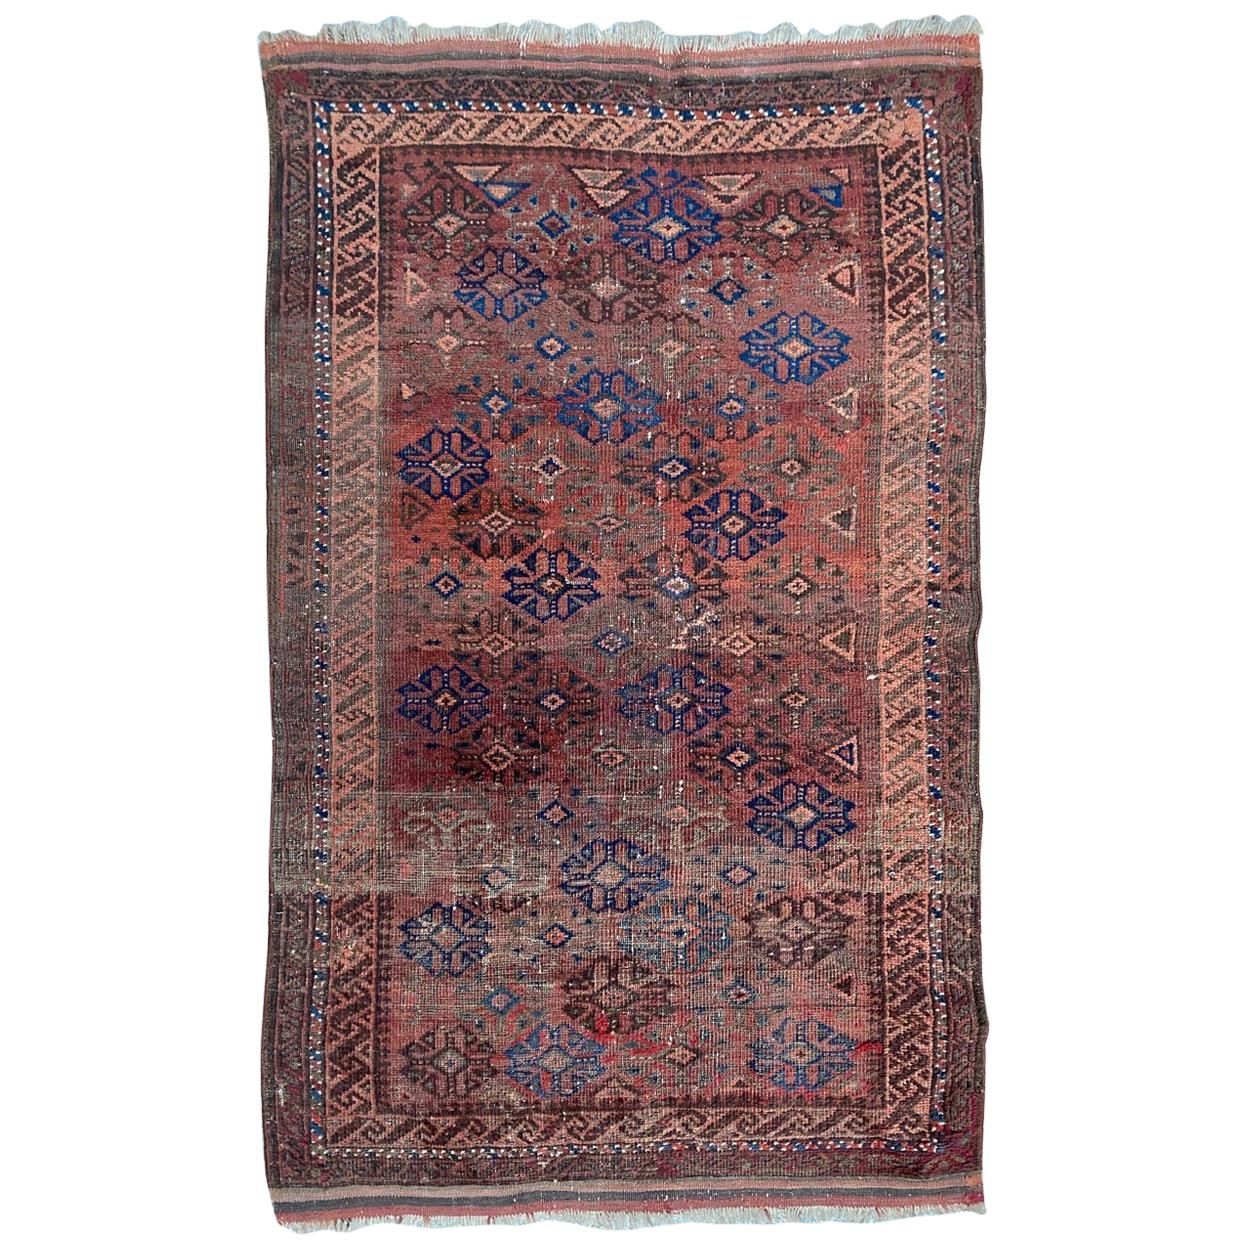 Distressed Antique Baluch Afghan Rug